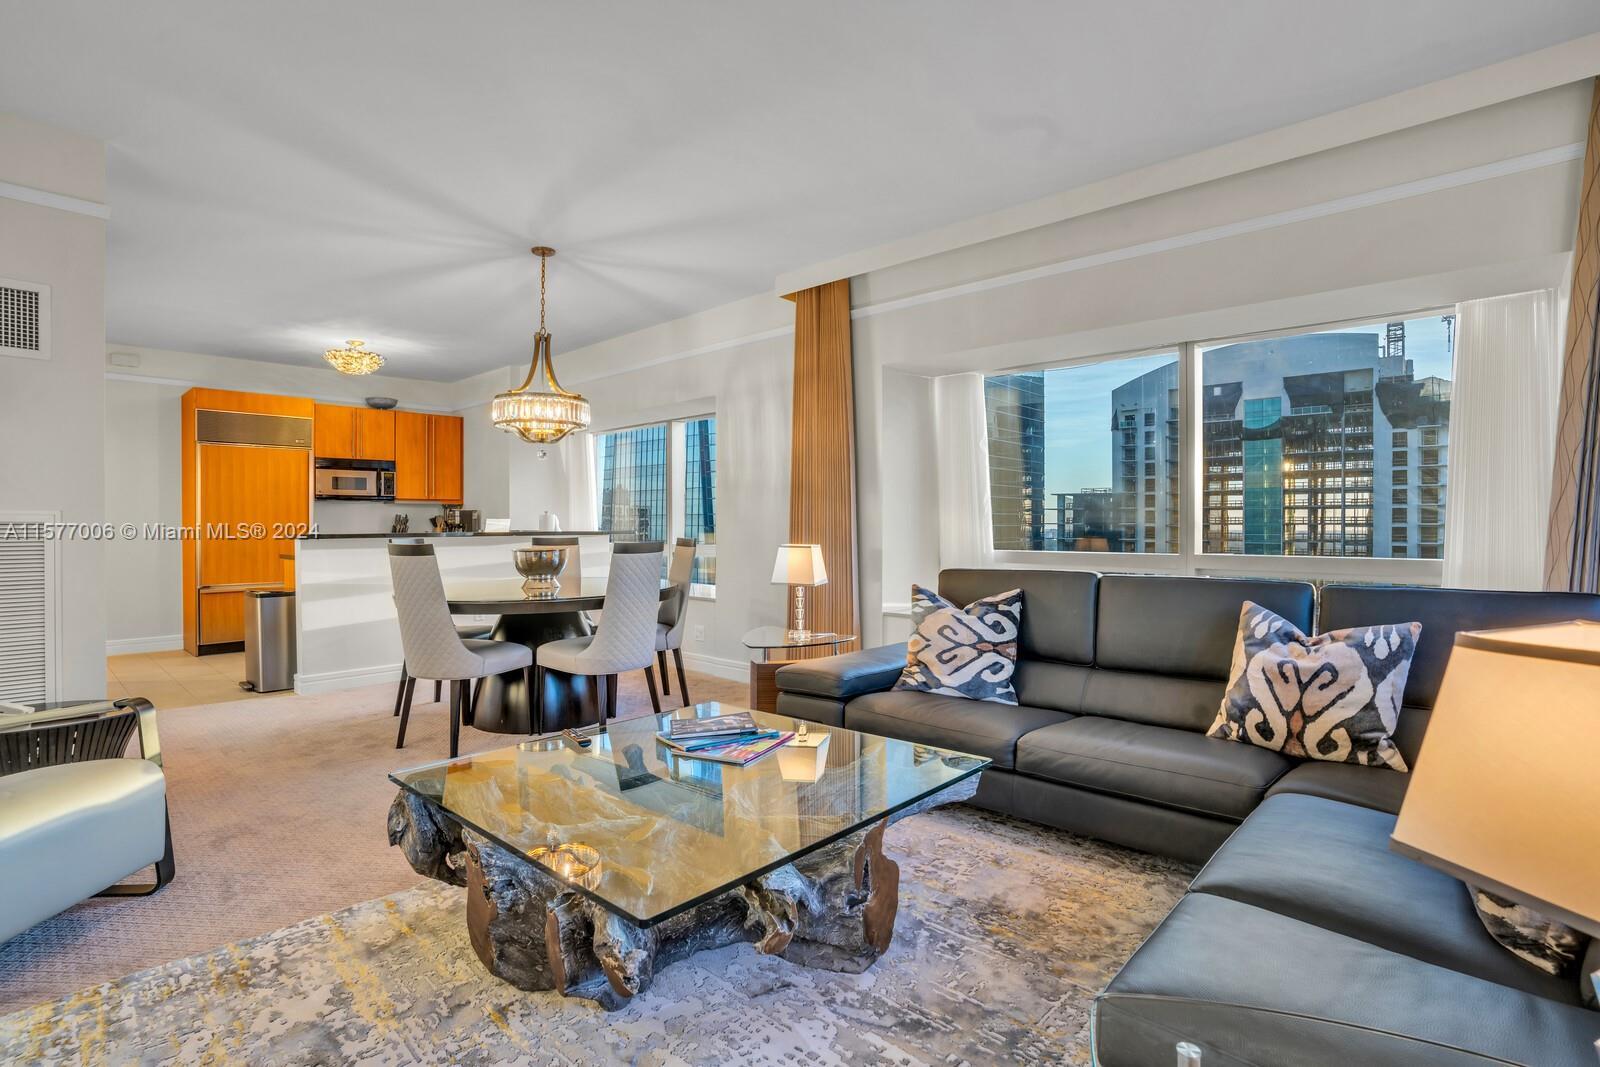 Luxurious sold fully furnished 2-bed, 2.5-bath unit at the 5-star Four Seasons hotel Brickell with b